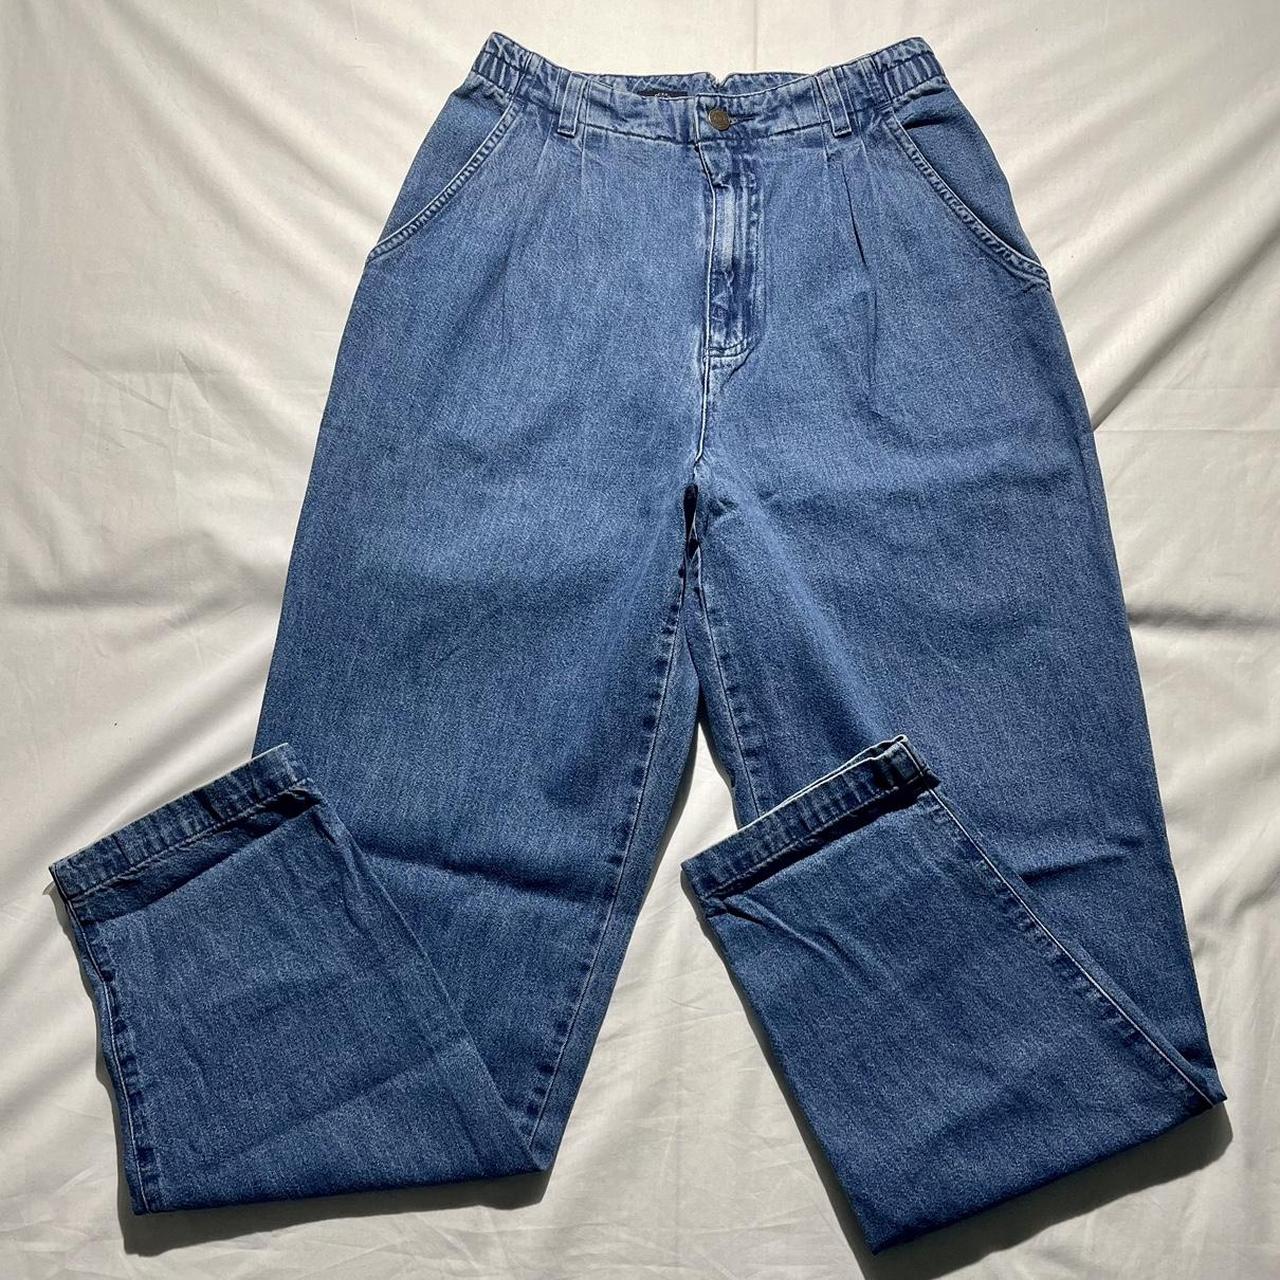 Pleated Vintage 90s high waisted jeans Brand:... - Depop